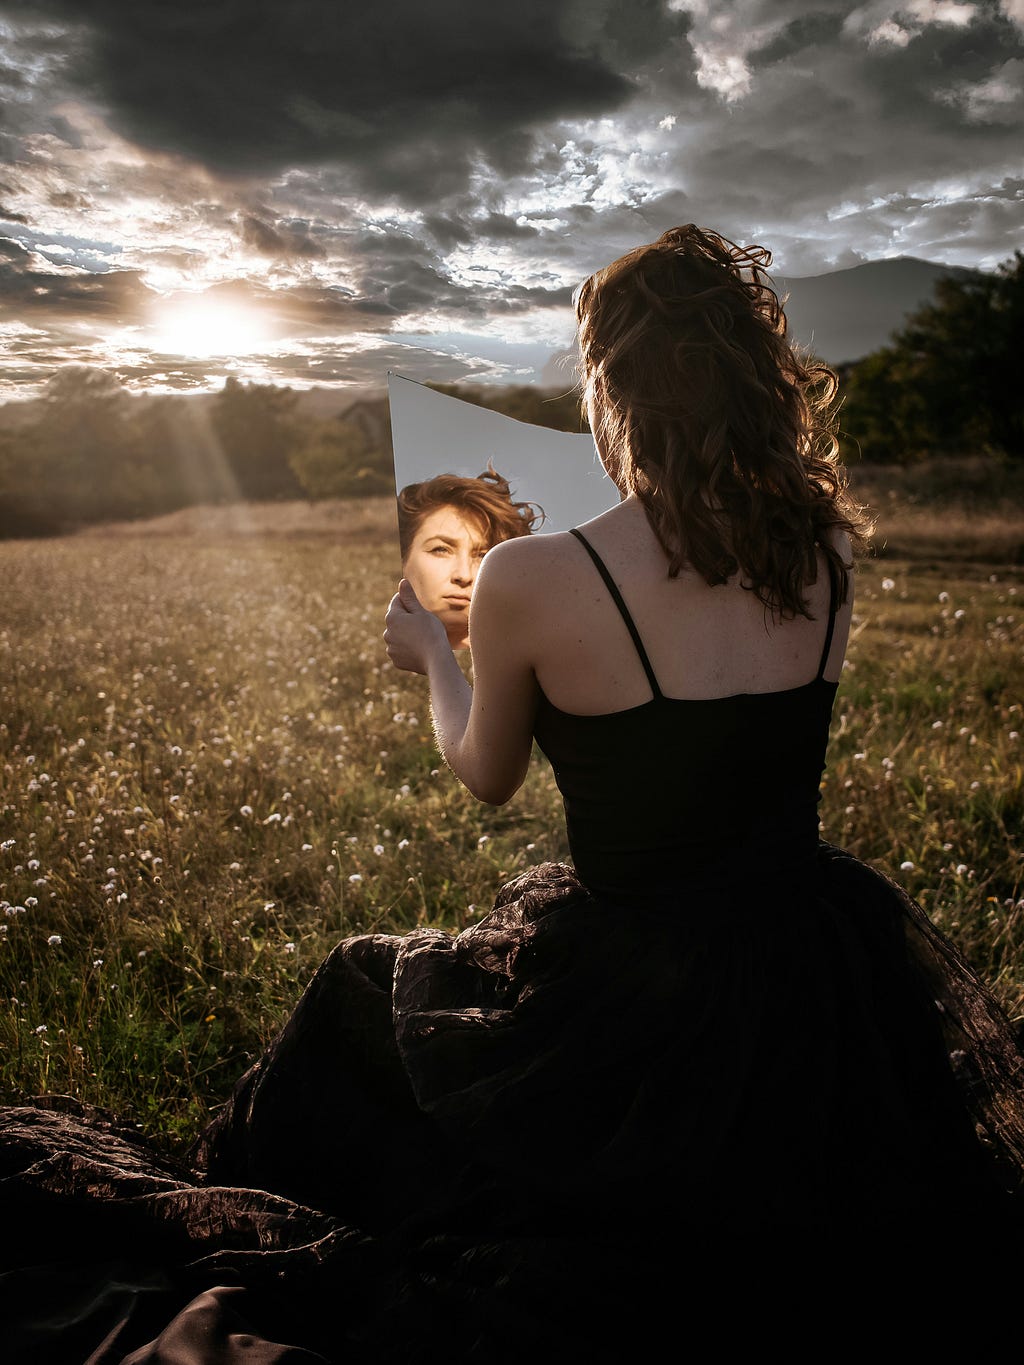 Woman sitting in field holding a mirror and looking at reflection